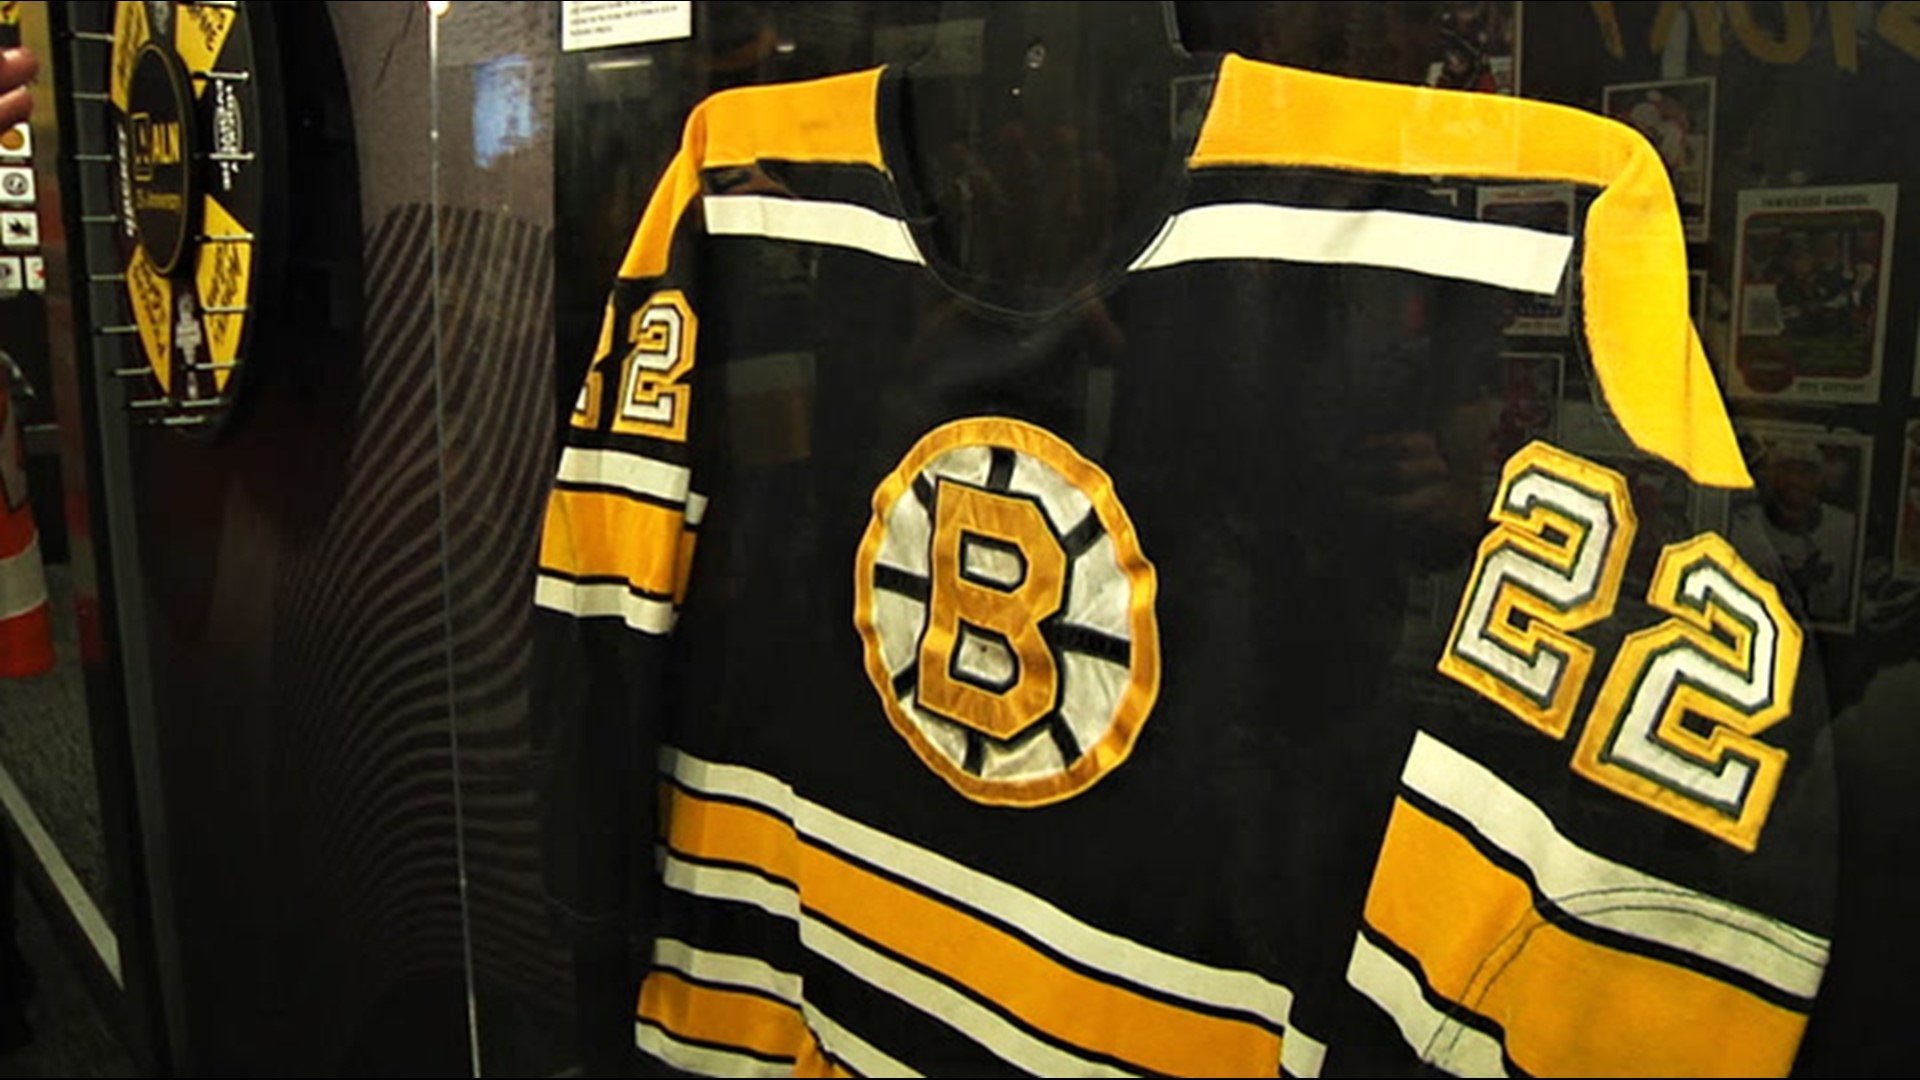 The National Hockey League has a mobile museum that is touring North America highlighting black athletes' contributions to the winter sport.